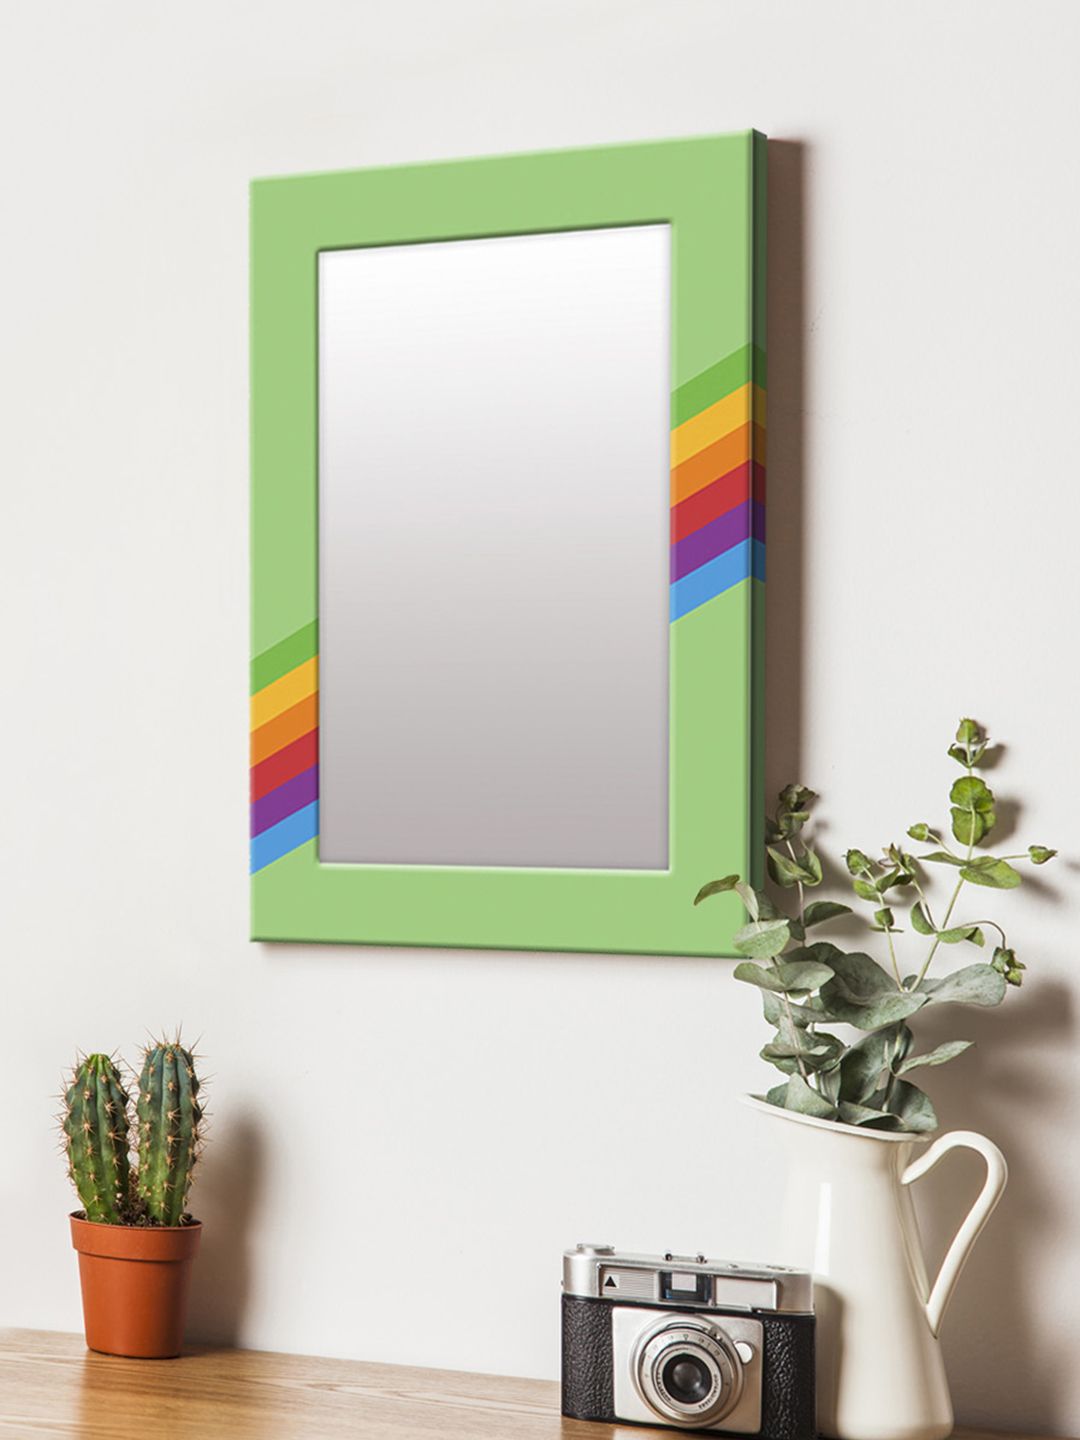 999Store Green & Multicoloured Printed MDF Wall Mirror Price in India